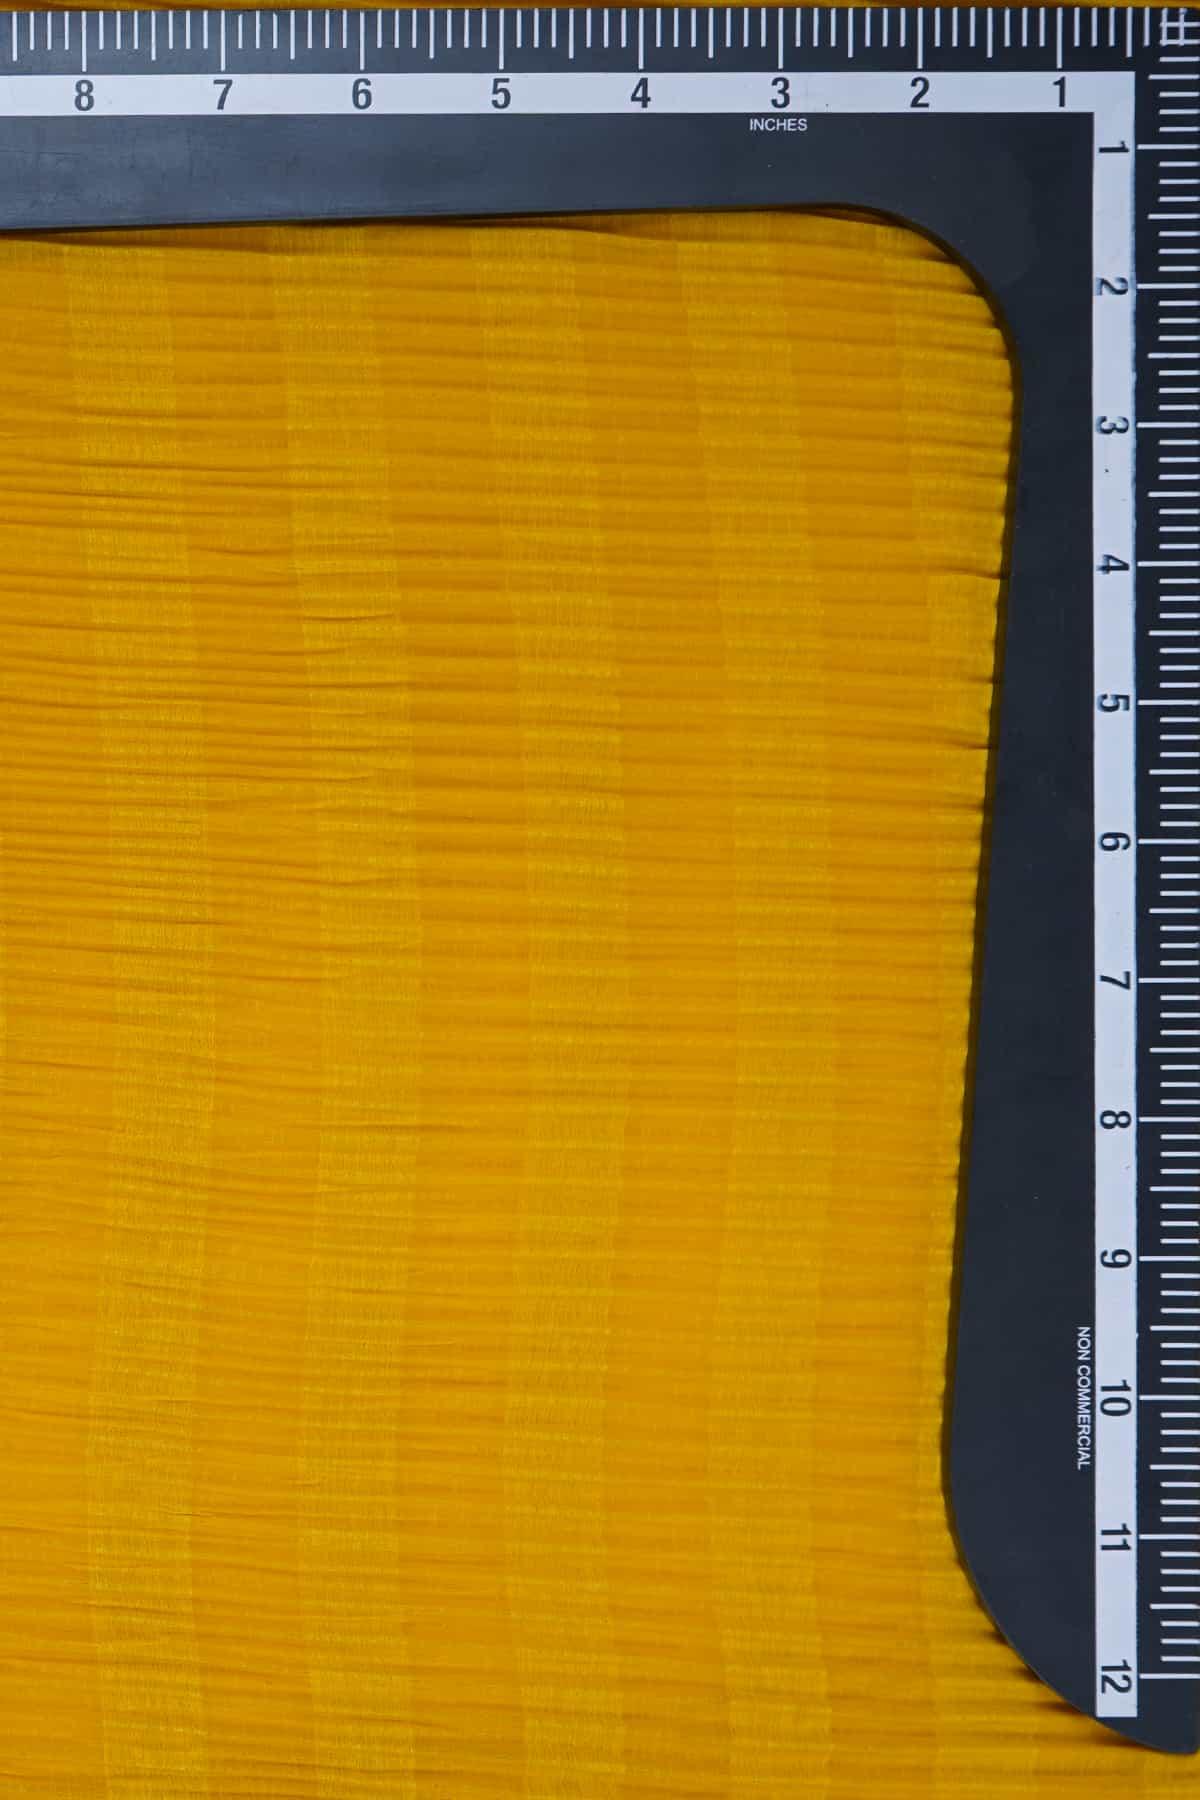 Pleated Shanaya Chiffon - saraaha.com - A line Dresses, Casual, casual Wear, Chiffon, Drapable, Dull and Pastel Colors, Festive  And Formal wear, Festive Wear, Formal Wear, Gowns, Light Weight, Pleated, Polyester, Sarees, Sheer, Skirts, Soft, Stripe Pattern, Tops and Blouses, Wide Color Variety, women wear